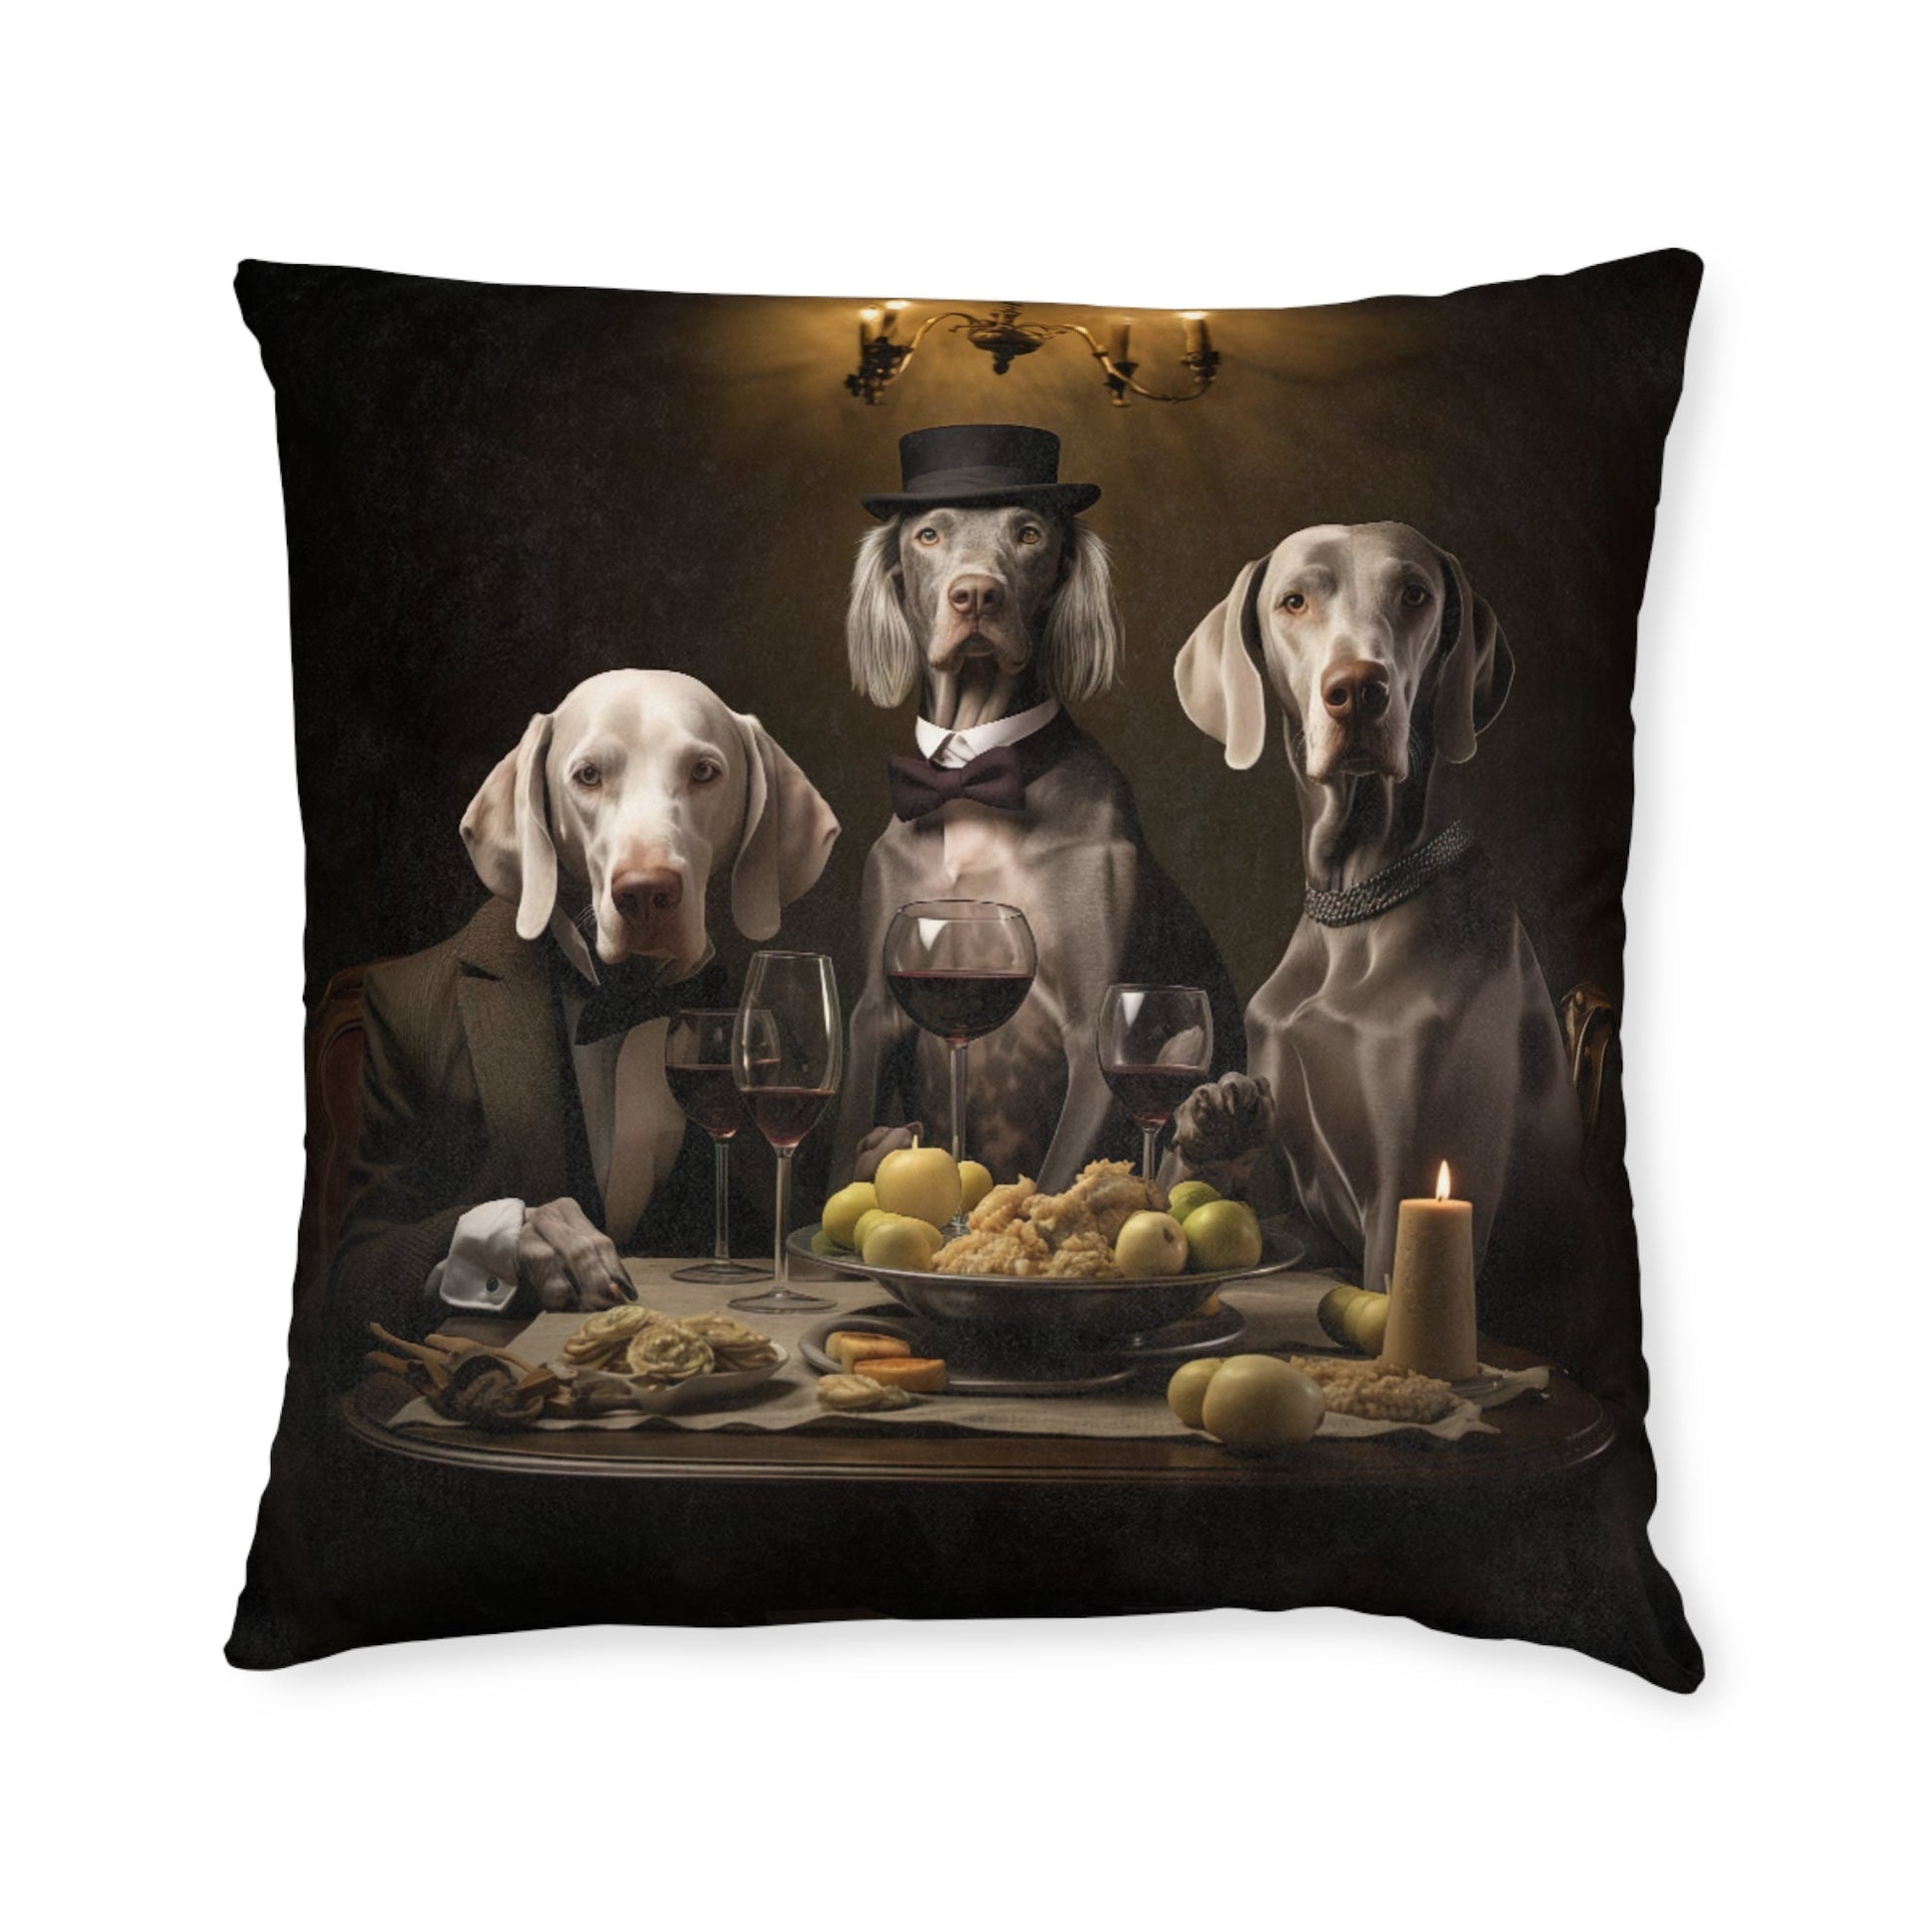 Square cushion with Weimaraners at Liquid Lunch Design - Hobbster